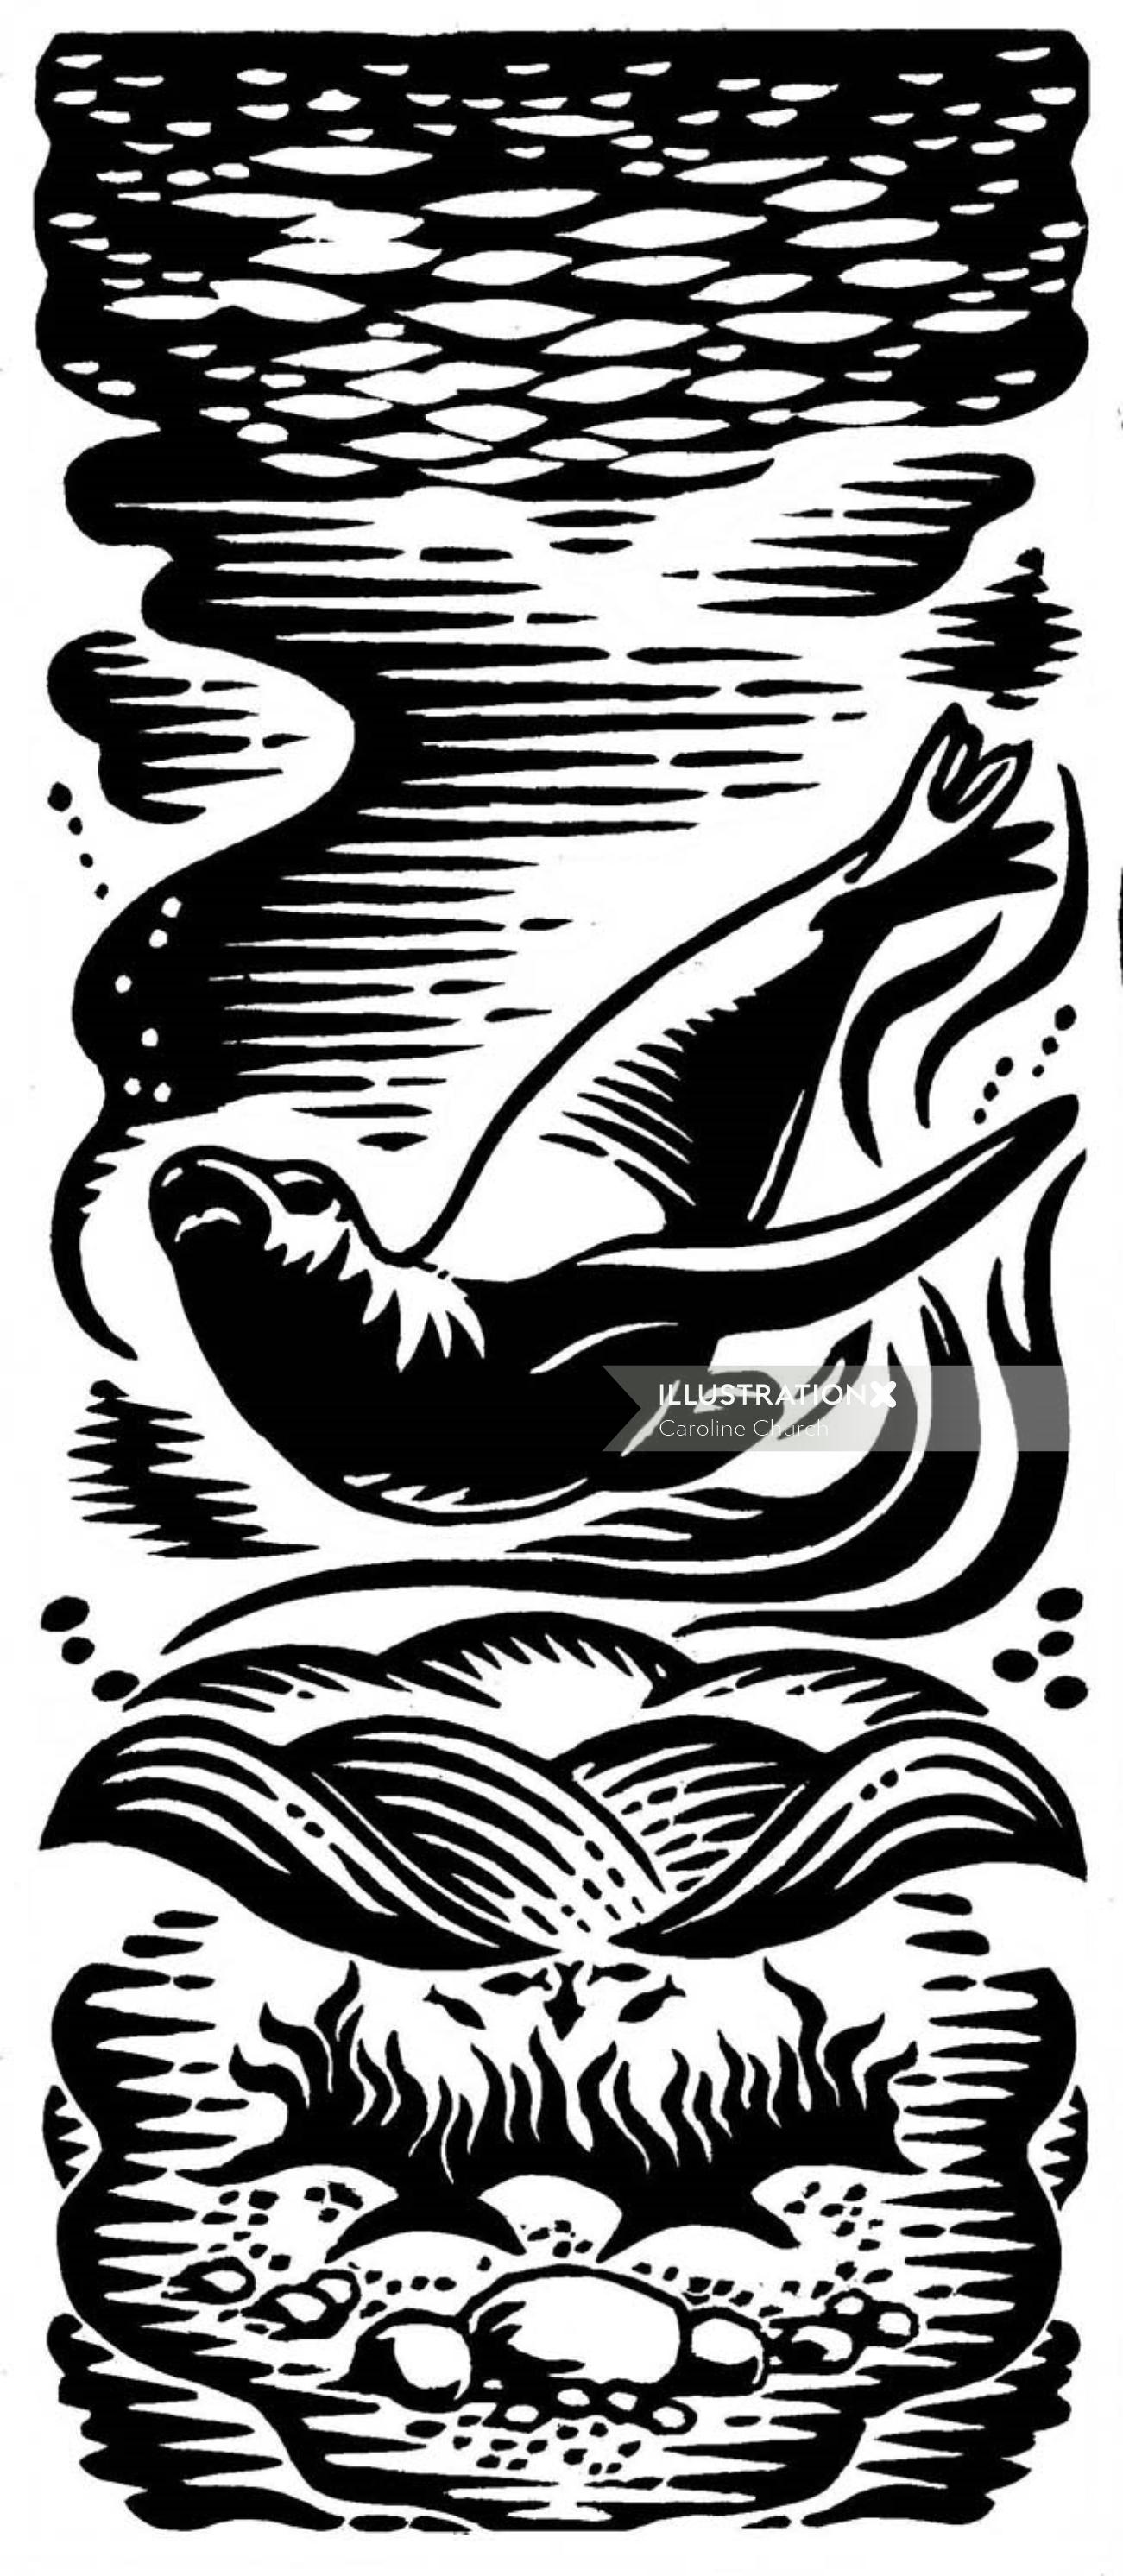 Seal under water black and white illustration